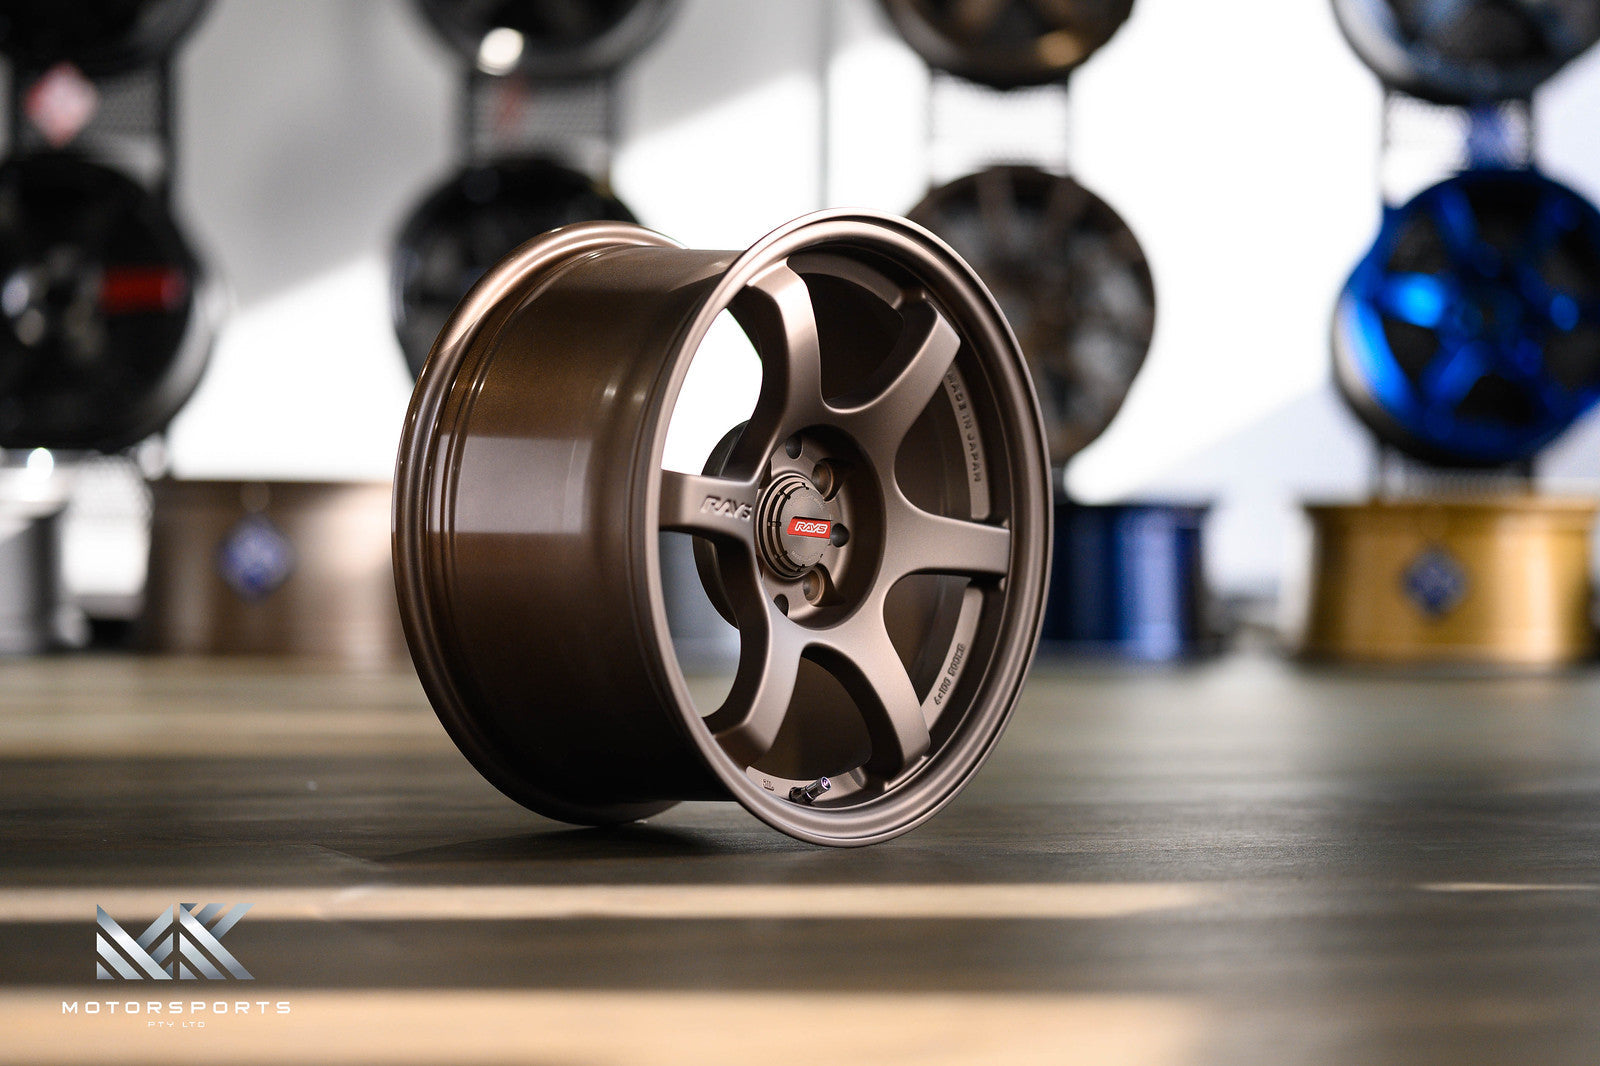 gramLIGHTS 57DR 15" - Premium Wheels from Gram Lights - From just $1790.0! Shop now at MK MOTORSPORTS